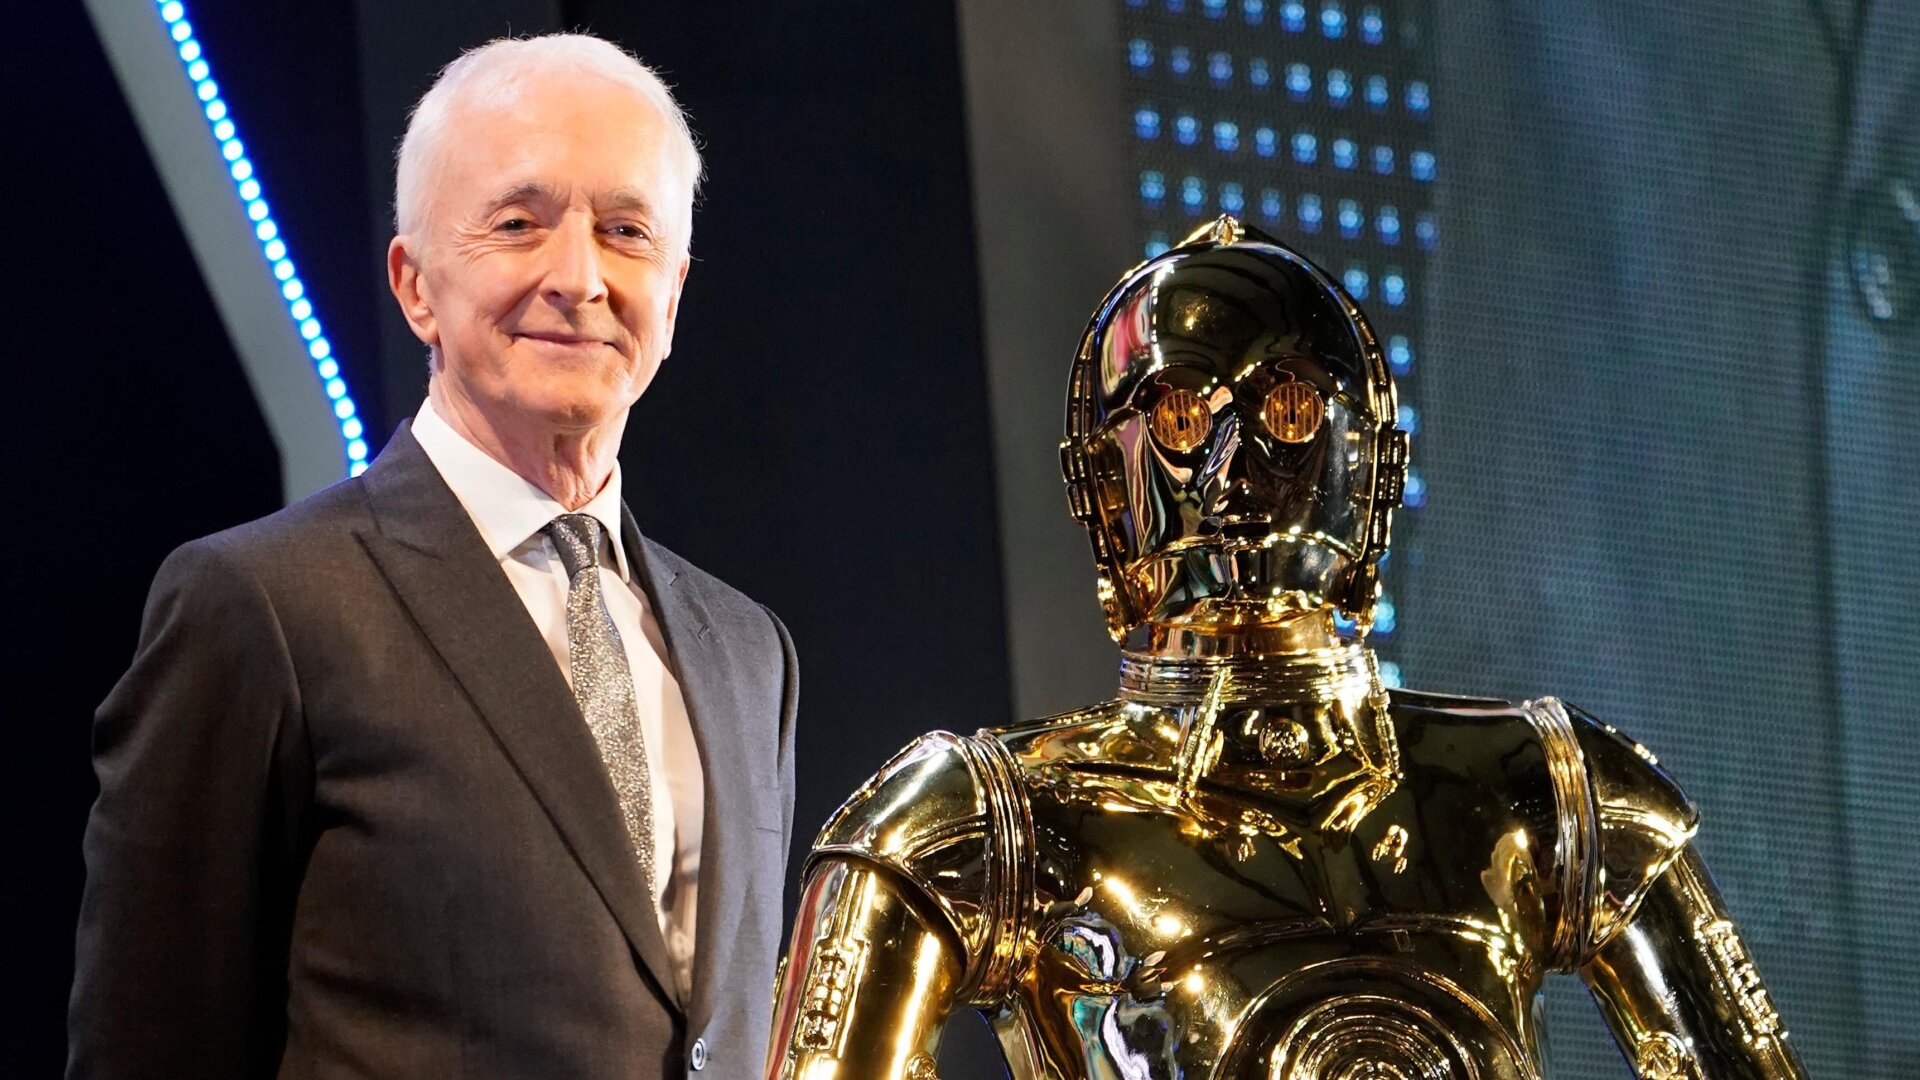 Anthony Daniels poses with C-3PO at a Japanese Star Wars: The Rise of Skywalker fan event on December 11, 2019.